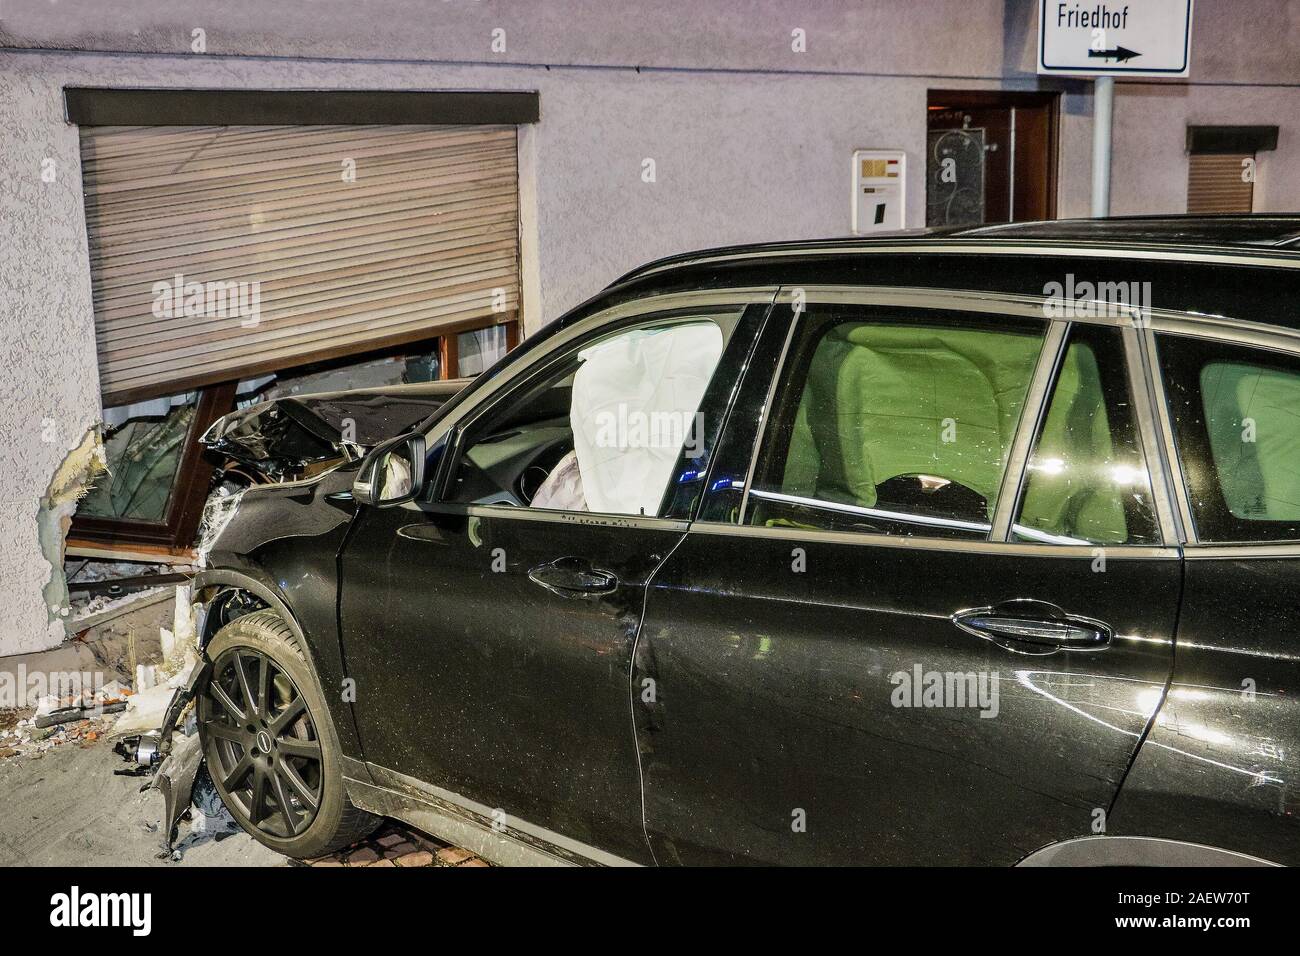 Gerlingen, Germany. 11th Dec, 2019. A car with a destroyed bonnet stands in front of a partially smashed living room wall of a detached house. A 26-year-old female driver probably left the road in a left-hand bend and entered the house frontally, probably as a result of speeding too high. According to initial findings, the resident and the 26-year-old remained uninjured. The house was so badly damaged that it is in danger of collapsing. Credit: Andreas Rometsch/KS-Images.de/dpa/Alamy Live News Stock Photo